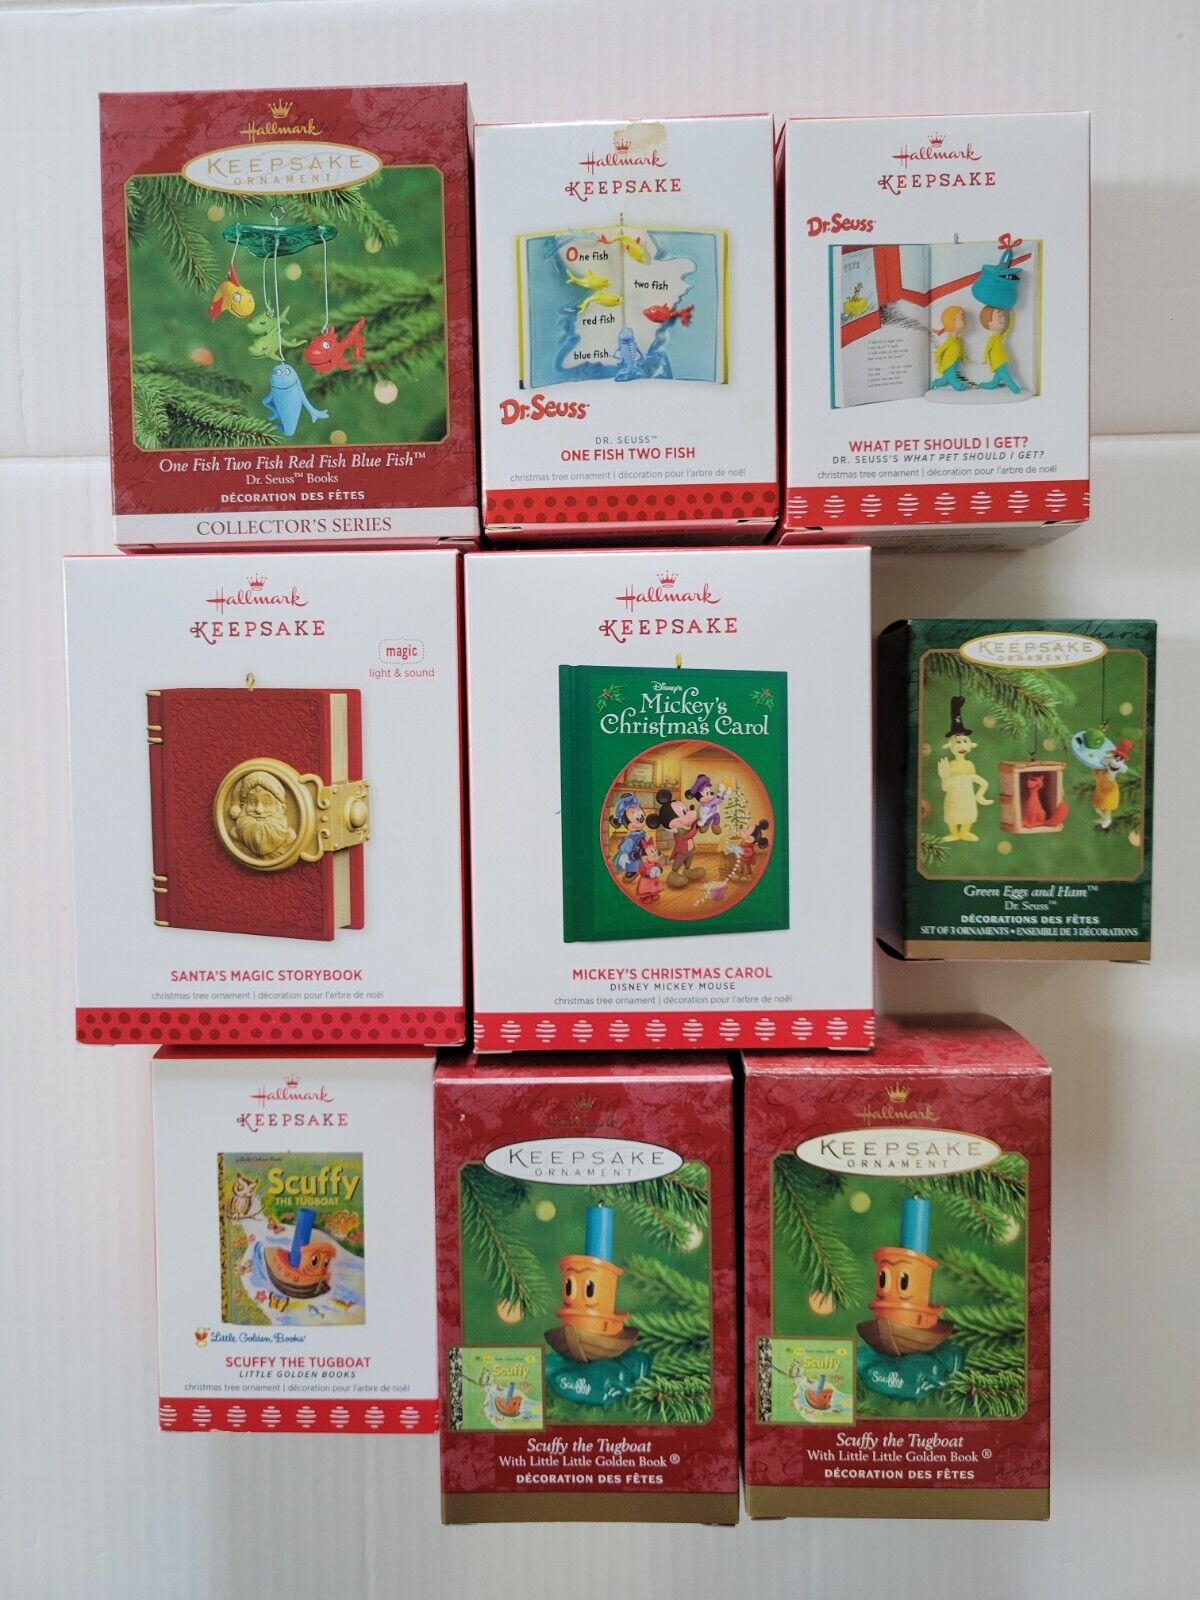 Lot of 9 Hallmark Storybook Ornaments - Dr. Seuss, Scuffy Tugboat, Mickey Mouse